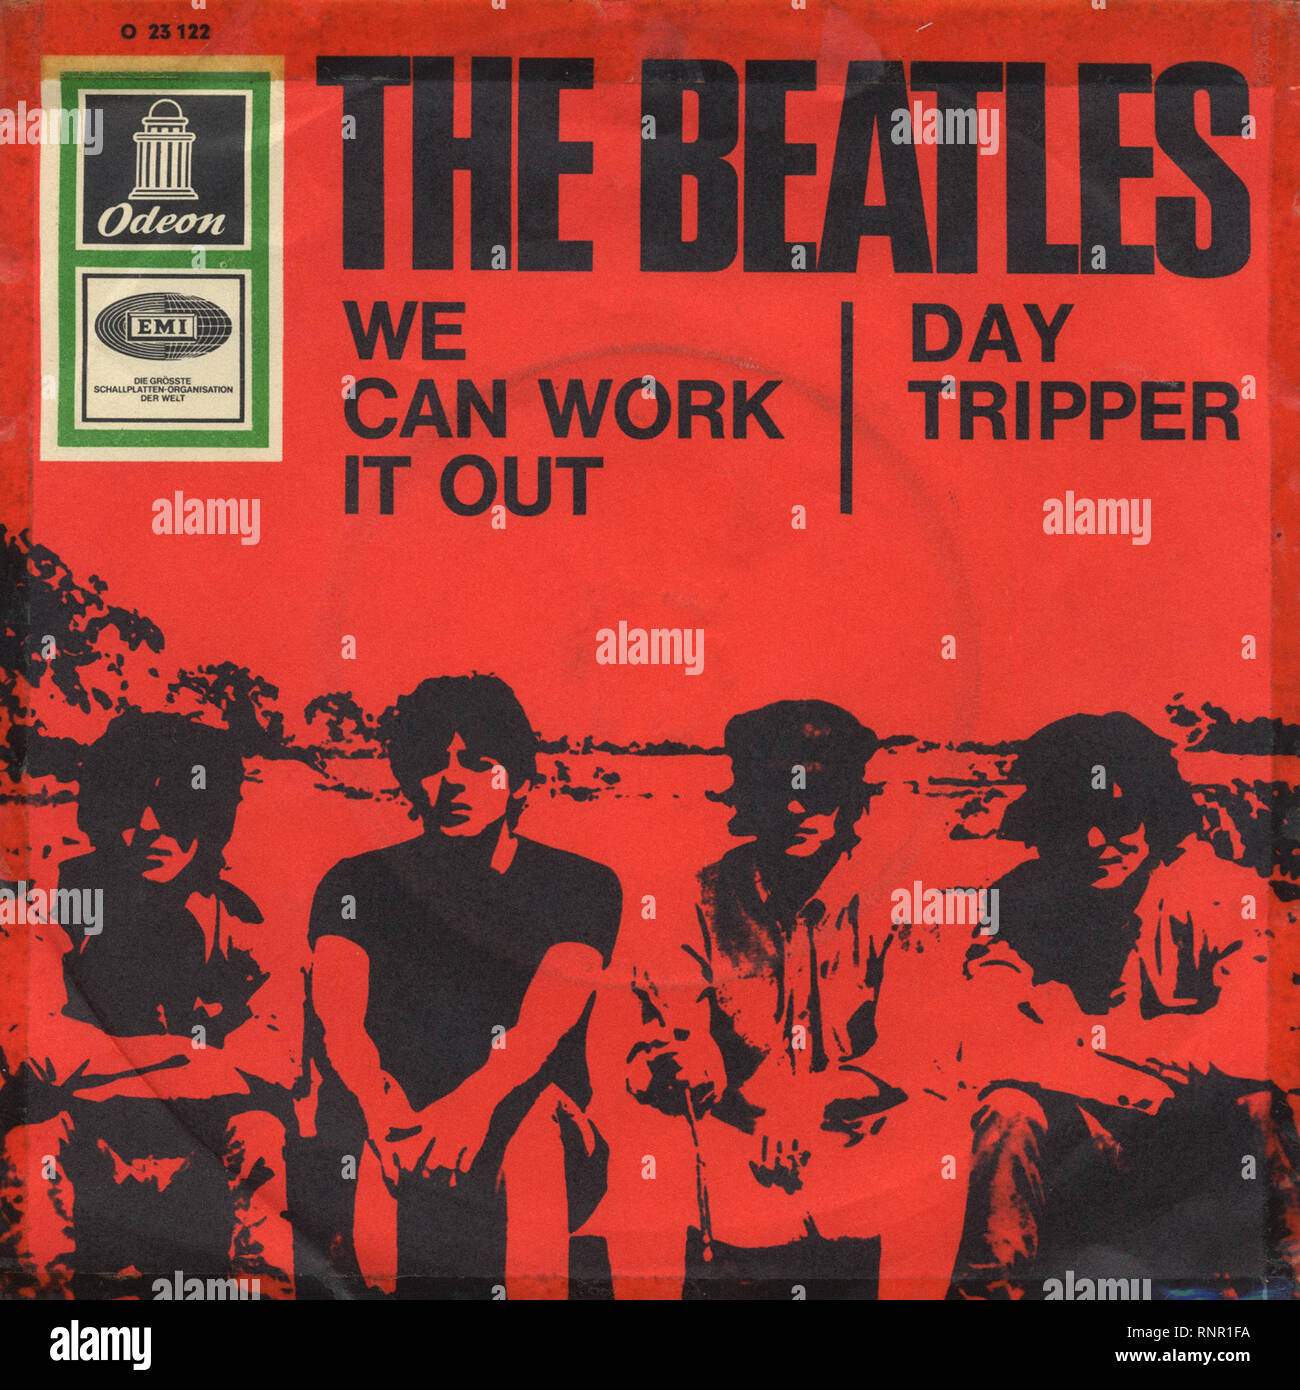 The Beatles - Day Tripper - Vintage Cover Album Stock Photo - Alamy